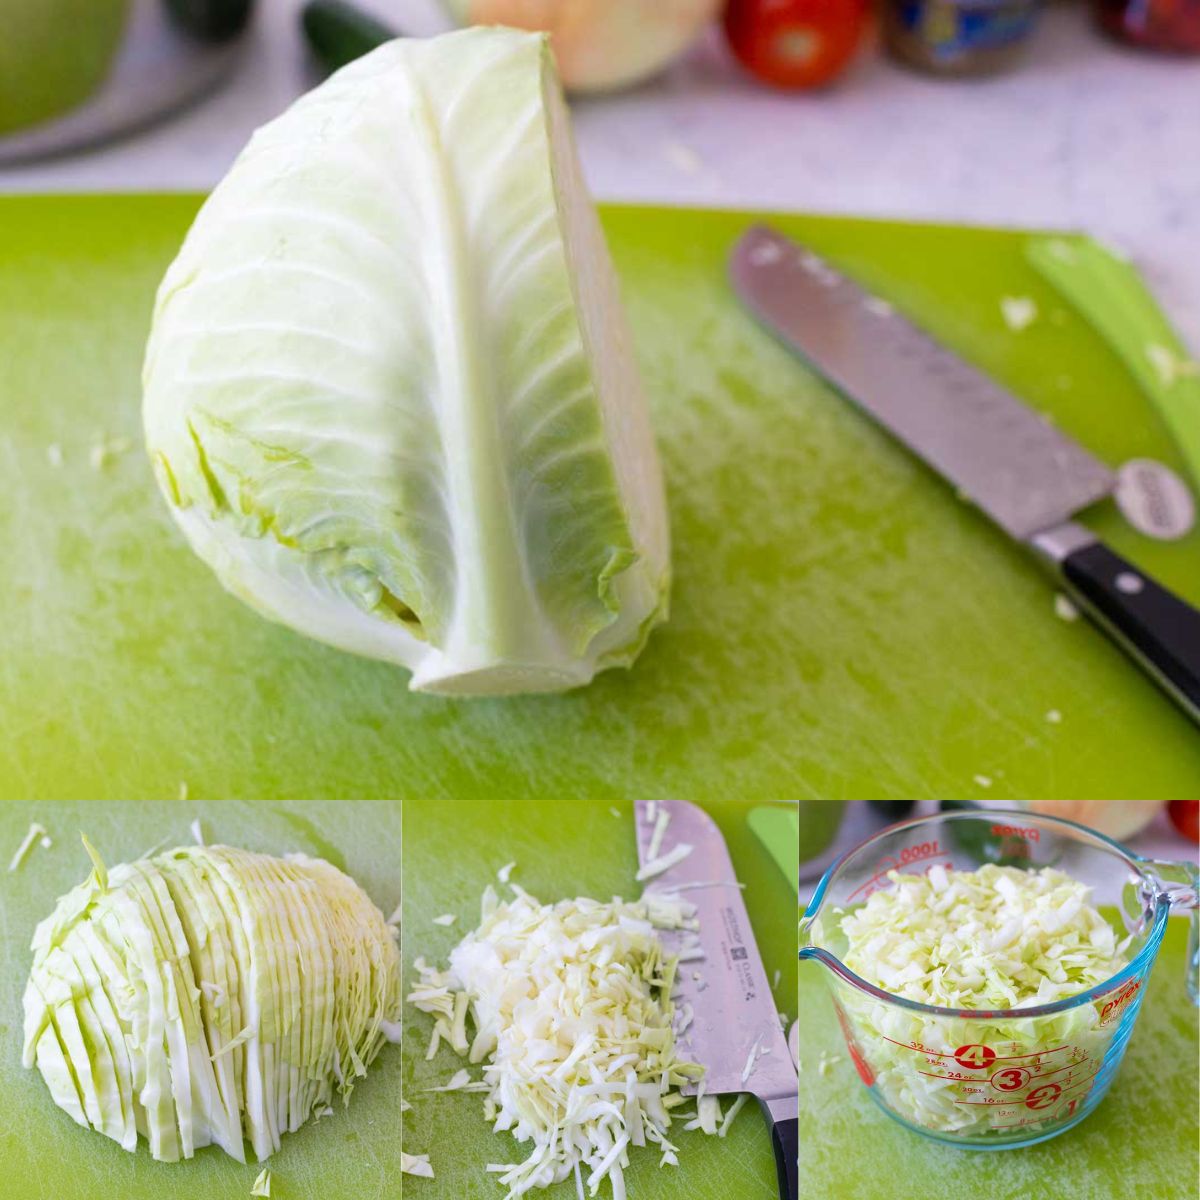 The step by step photos show how to shred a cabbage for chow chow relish.